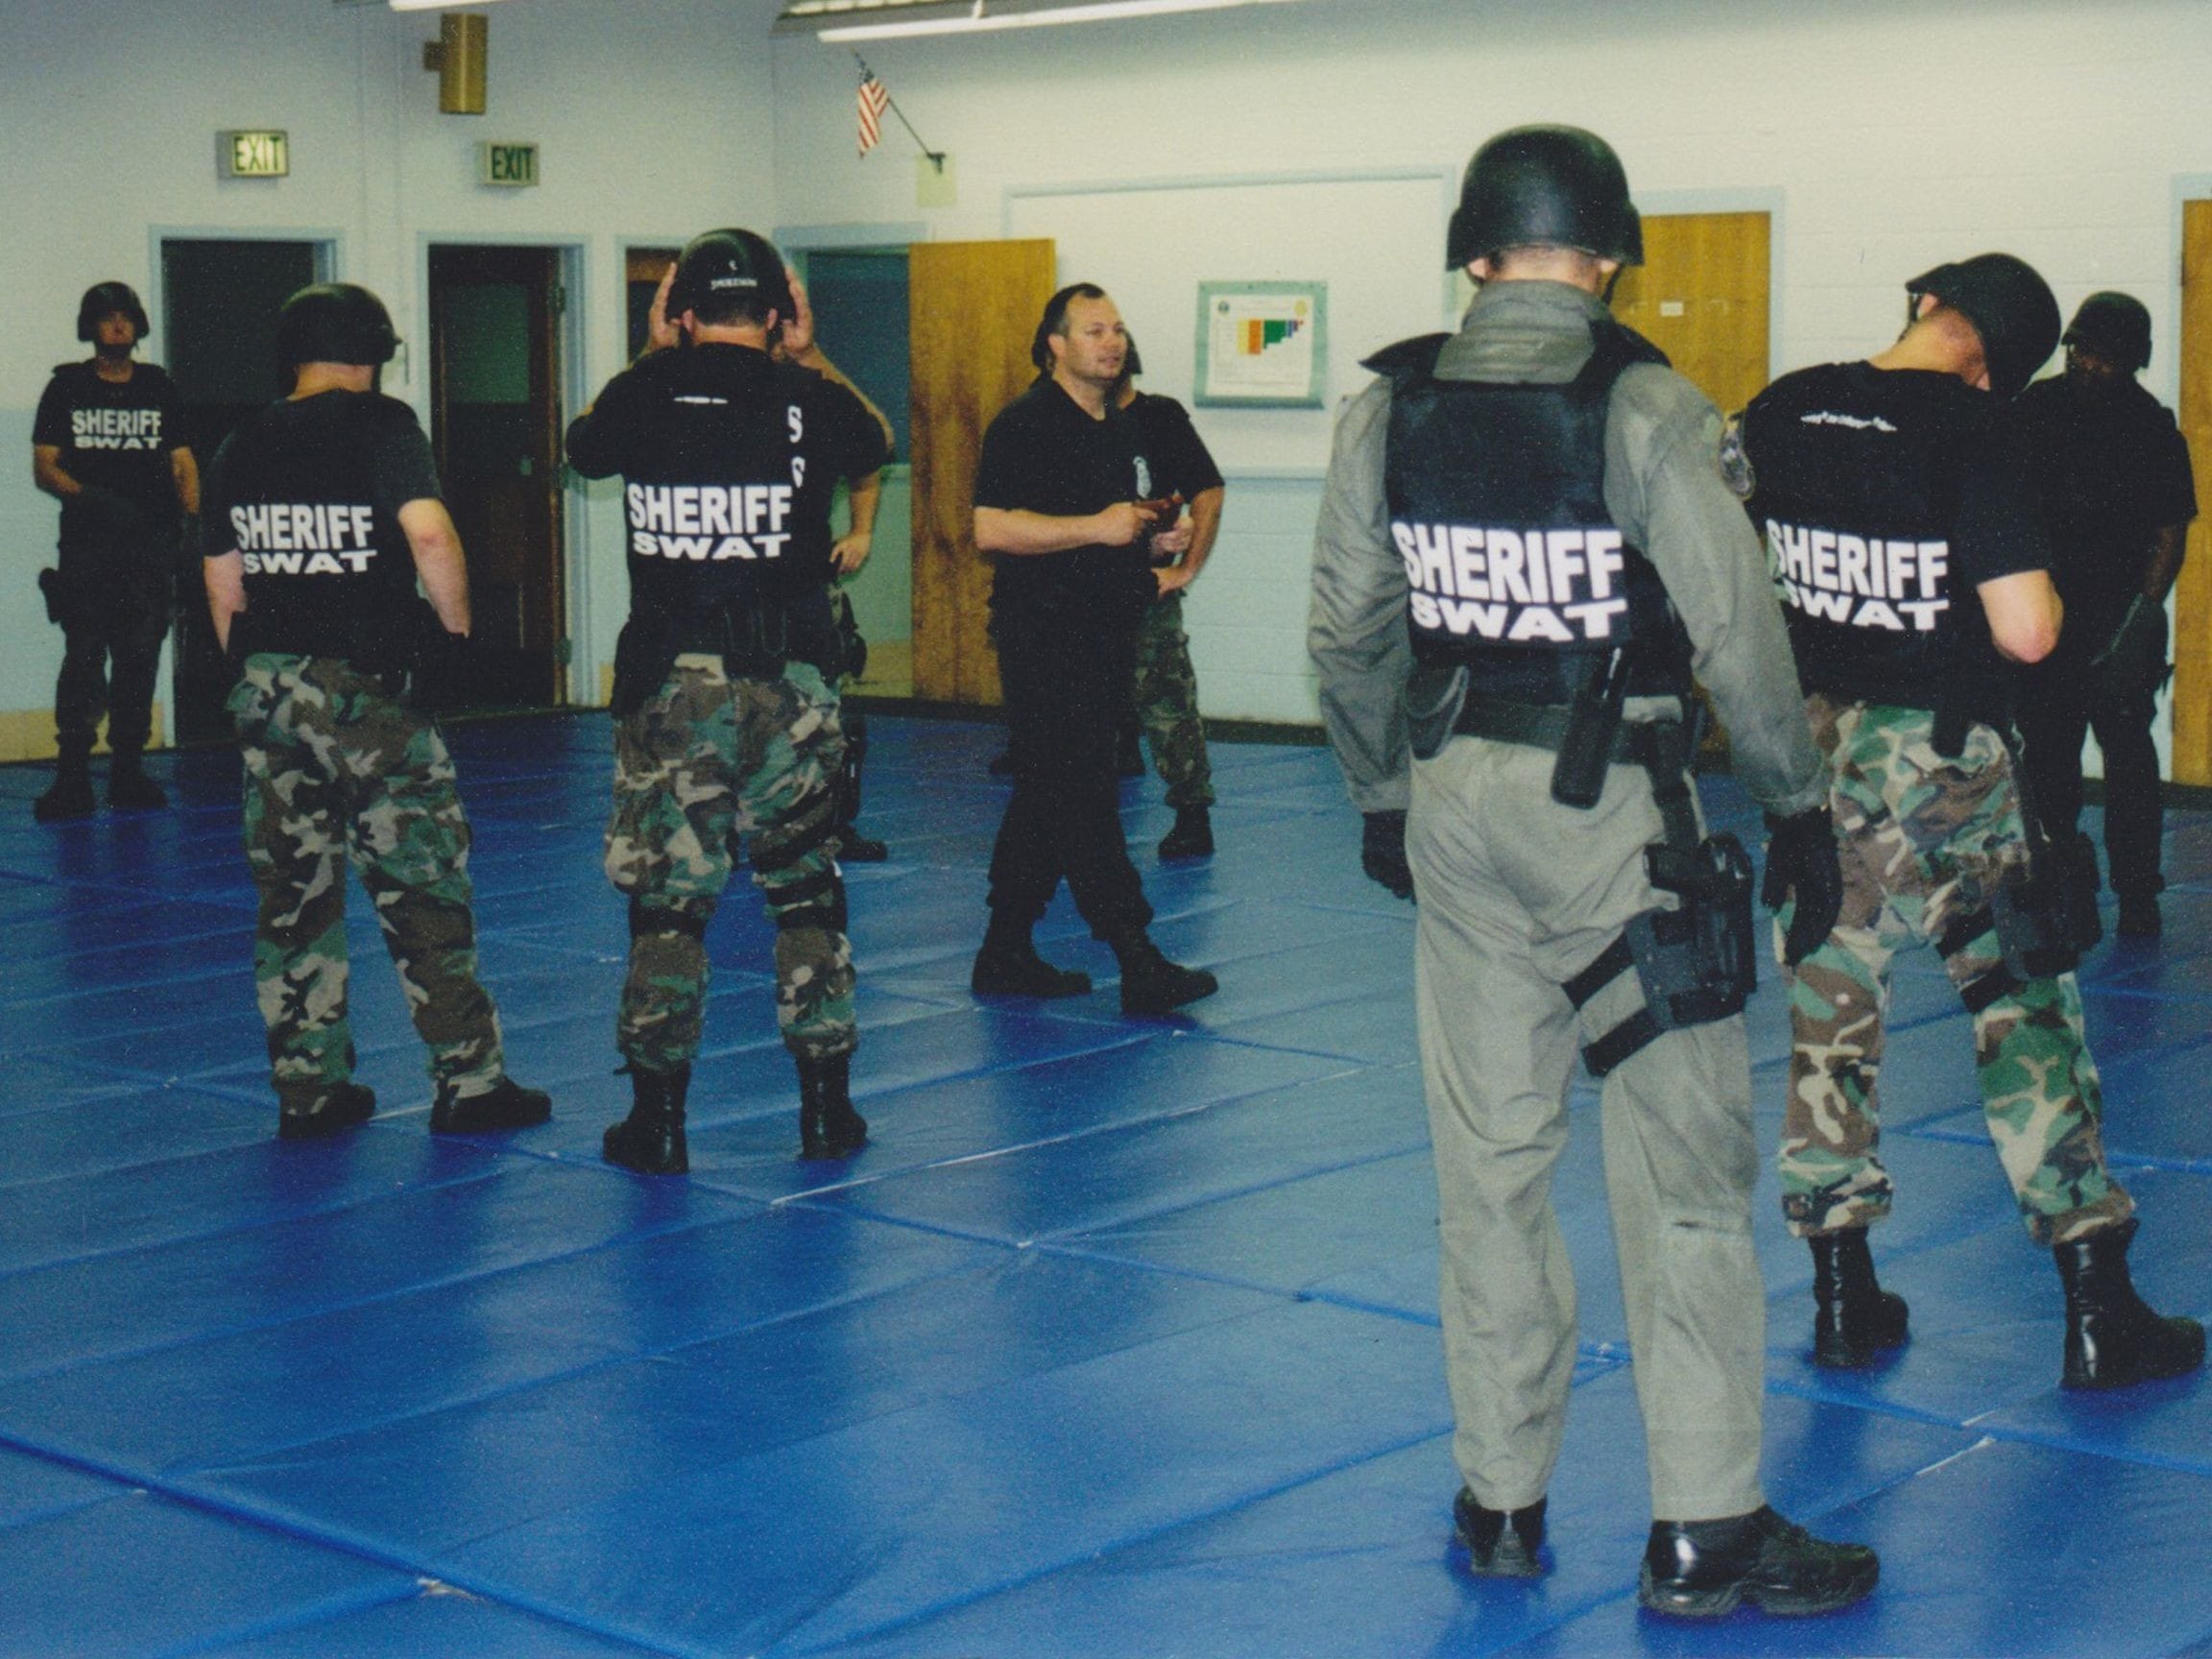 Here Jim is teaching a SWAT team in the Boston area.